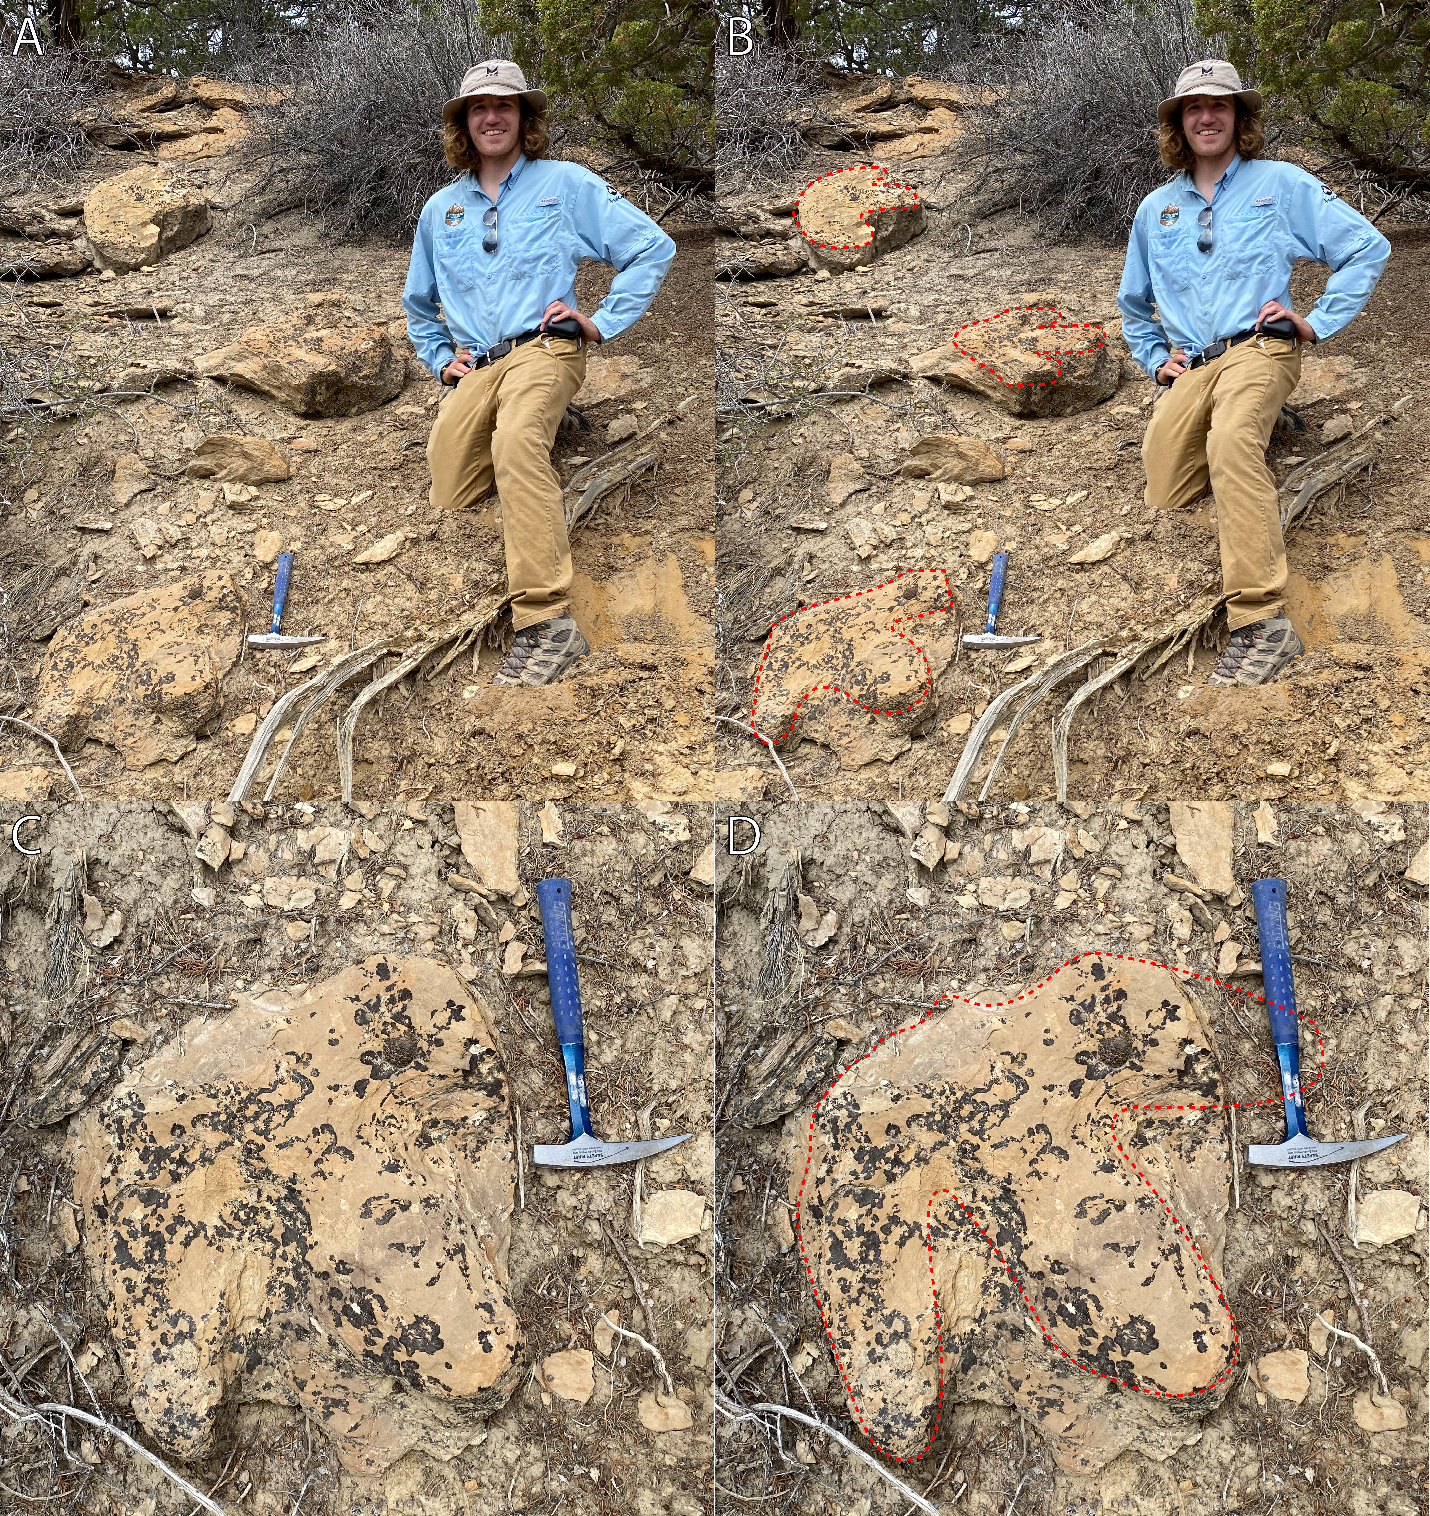 two images of a person standing on a slope with fossil dinosaur tracks